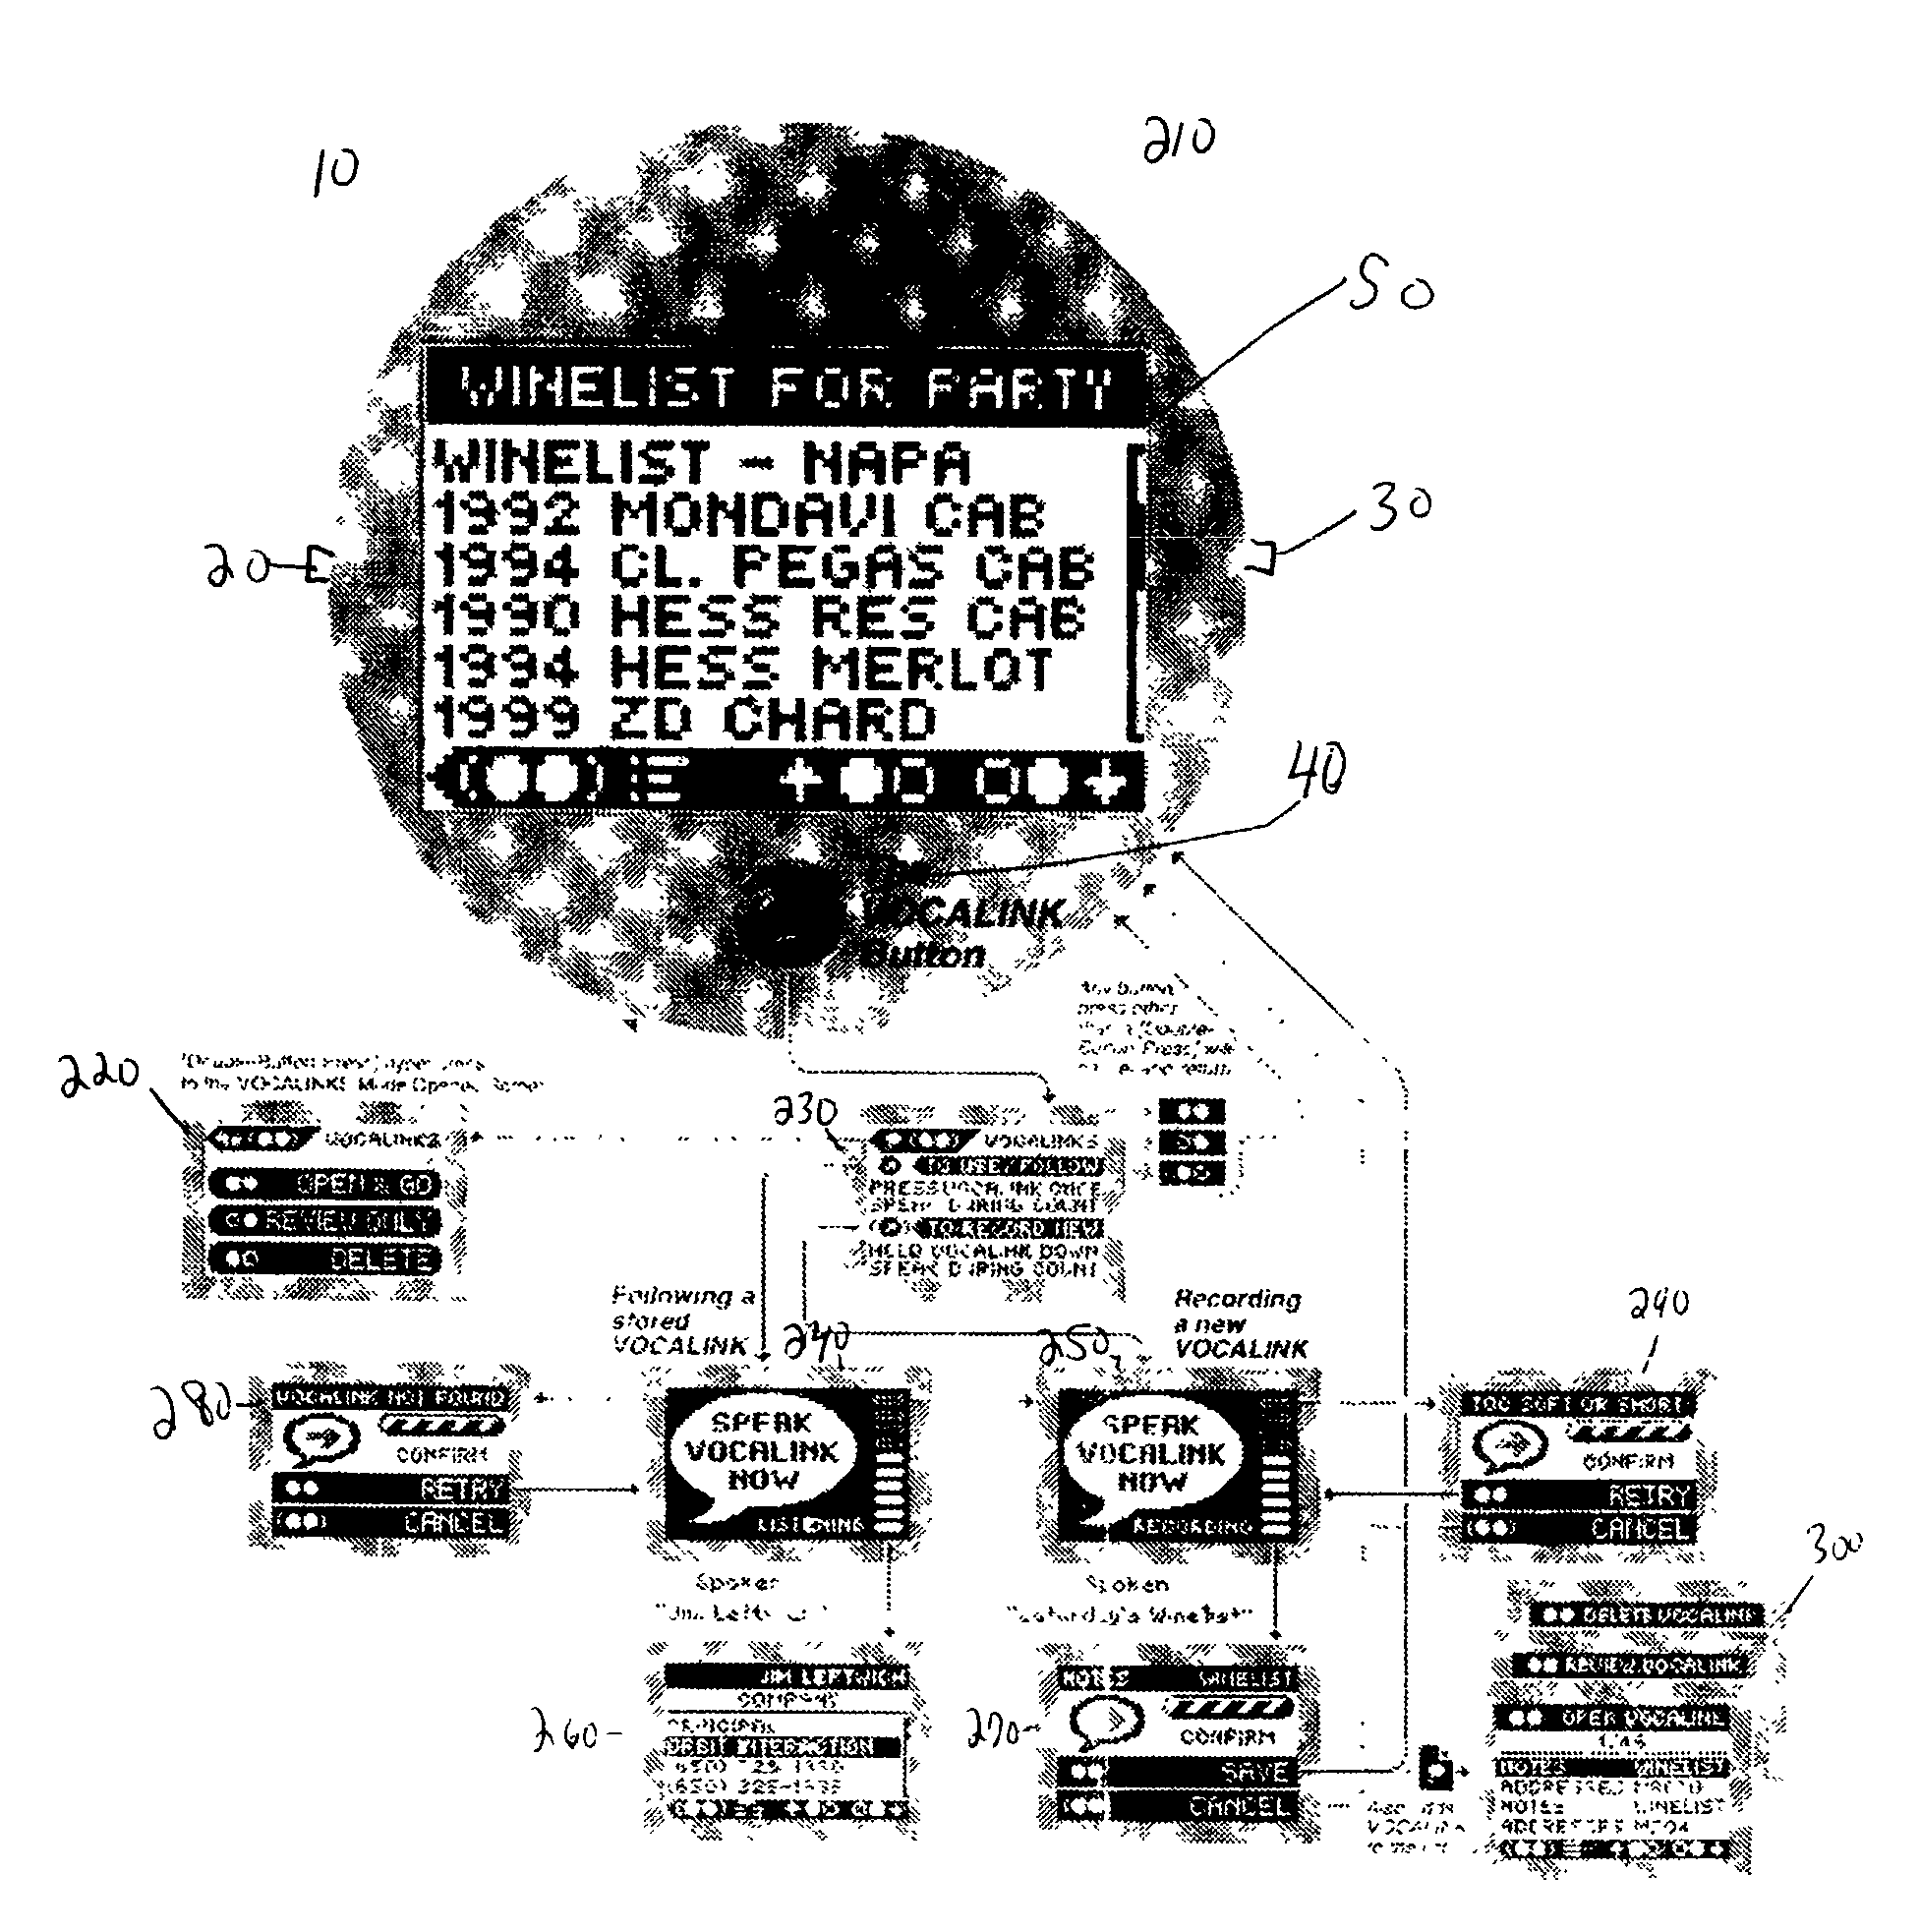 Operating method for miniature computing devices